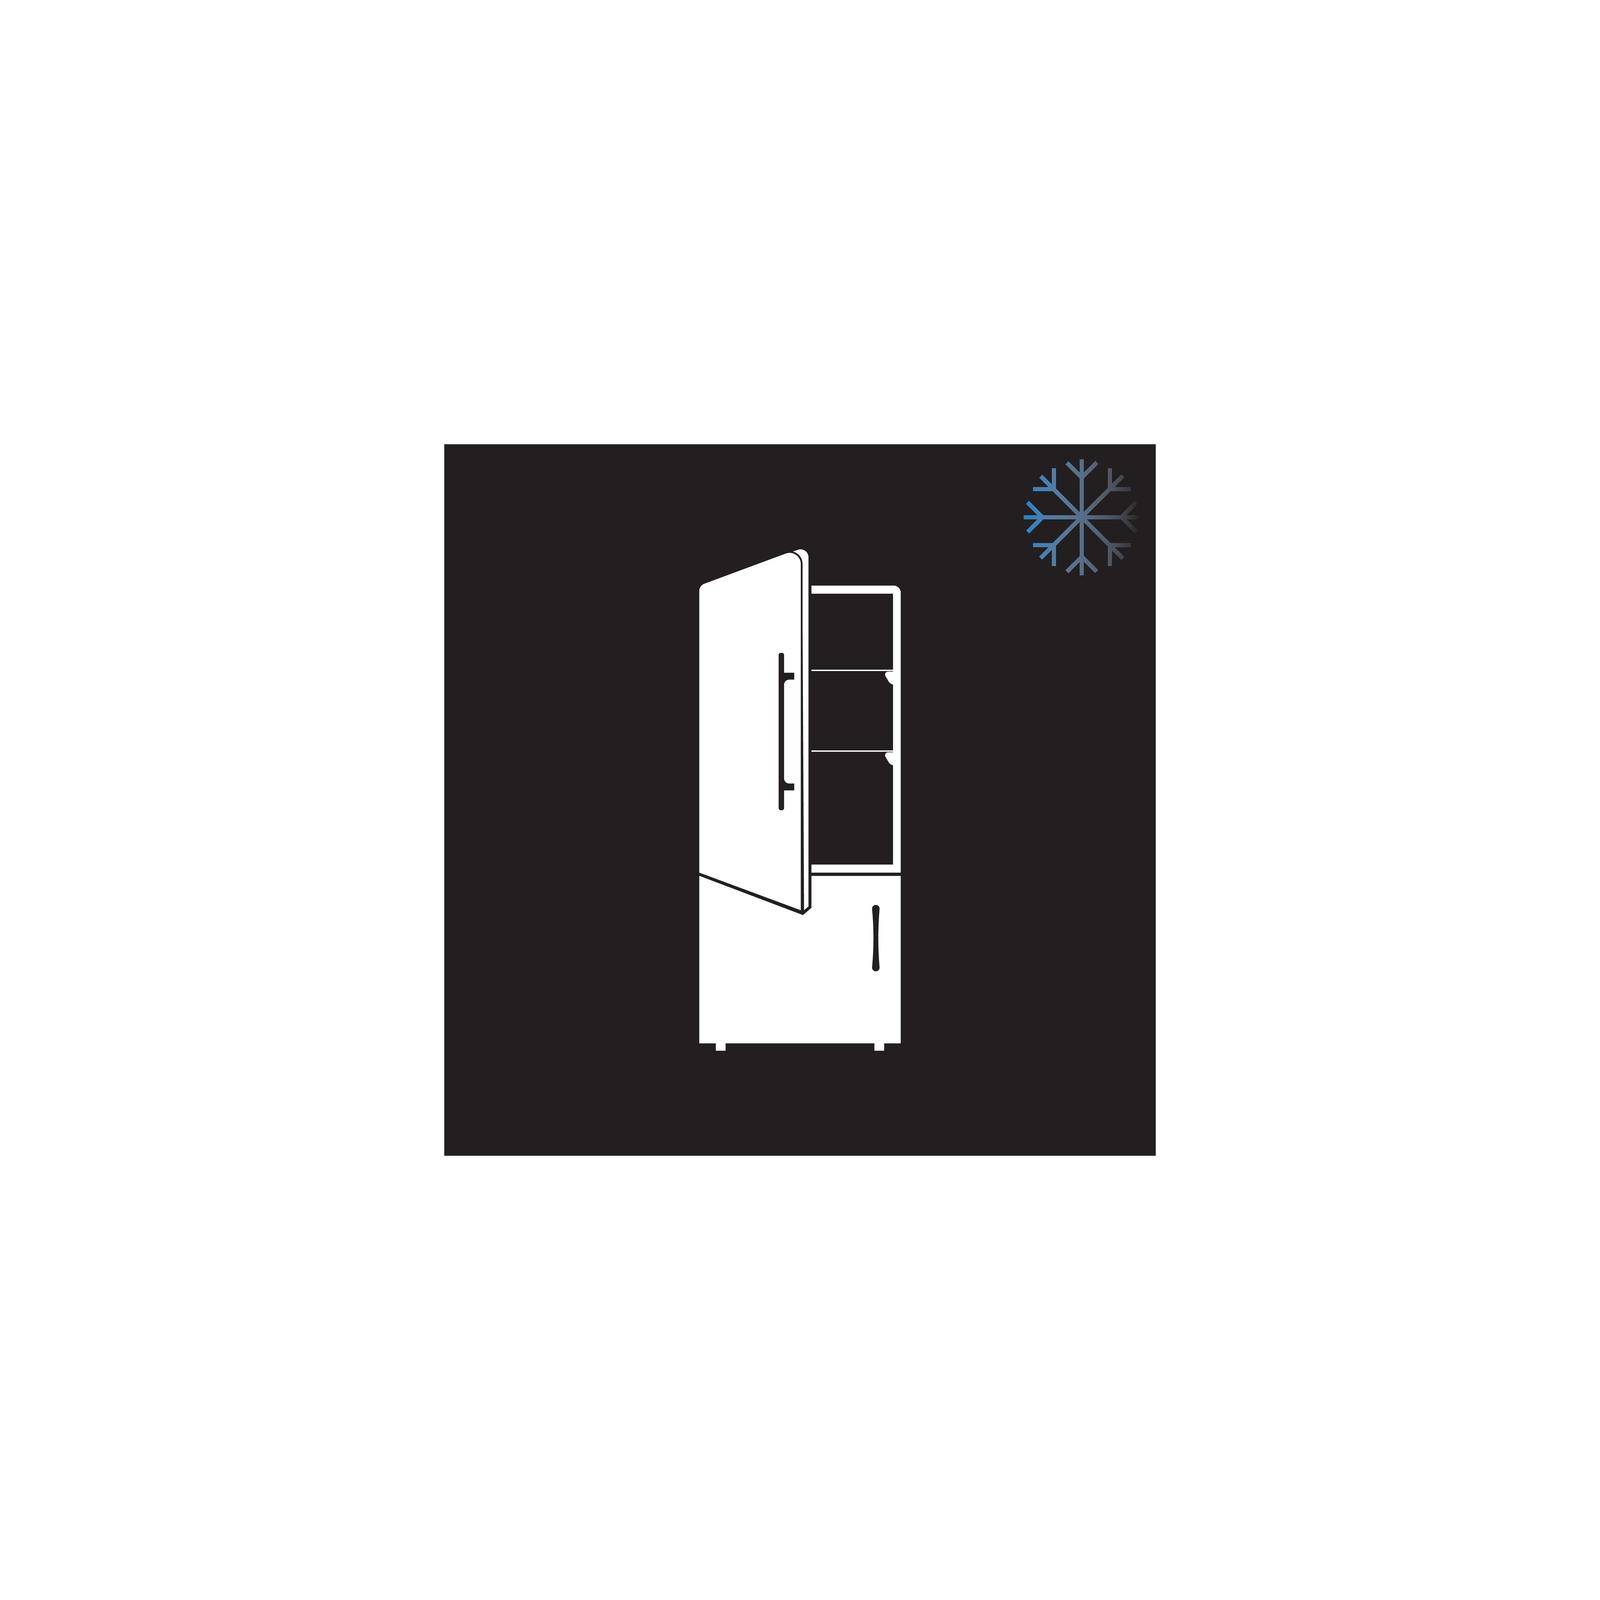 Refrigerator icon by rnking